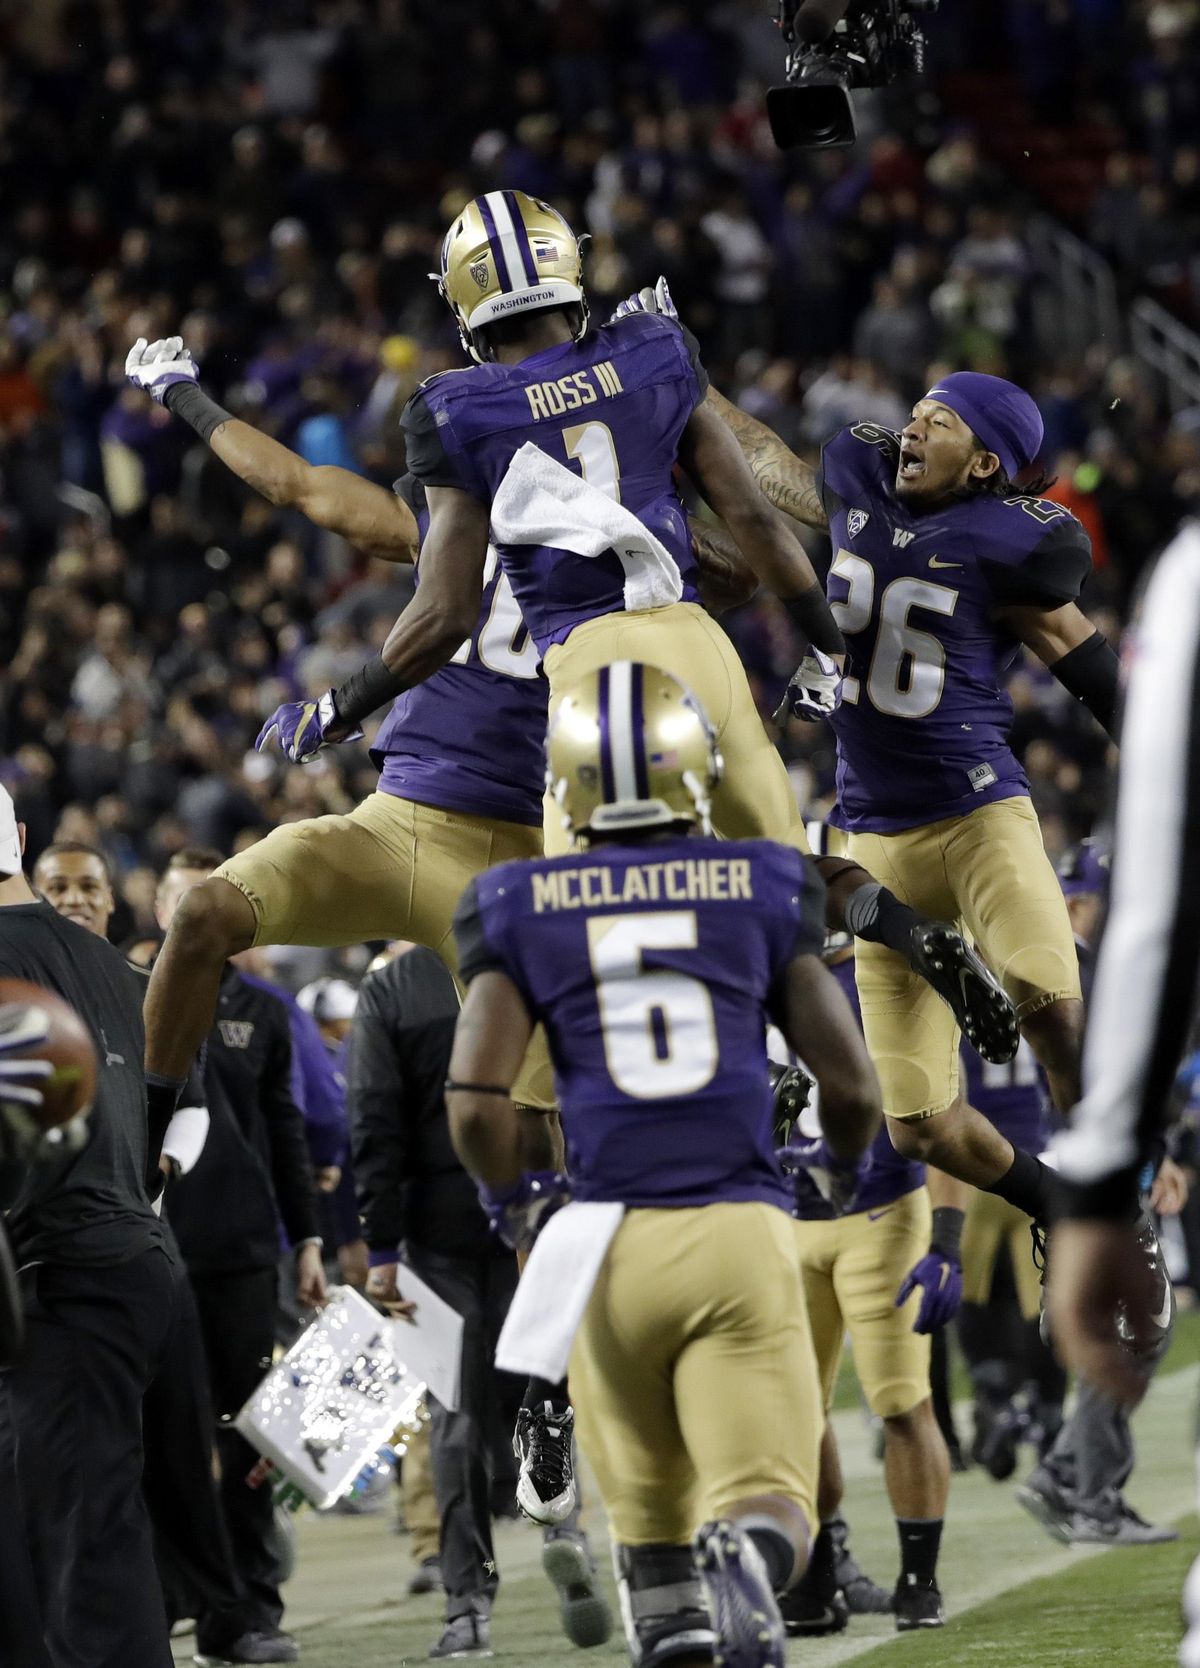 Washington wide receiver John Ross (1) celebrates his touchdown catch with teammates, including Sidney Jones (26) and Chico McClatcher (6), during the second half of the Pac-12 Conference championship NCAA college football game against Colorado Friday, Dec. 2, 2016, in Santa Clara, Calif. (Marcio Jose Sanchez / Associated Press)